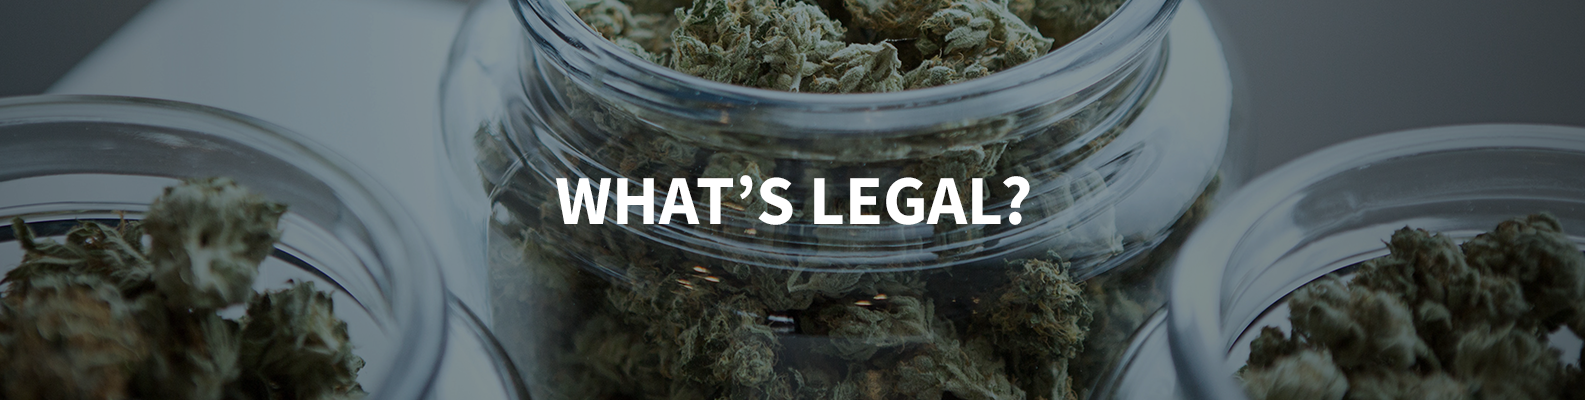 picture of cannabis flowers with text across image that reads: What's legal?